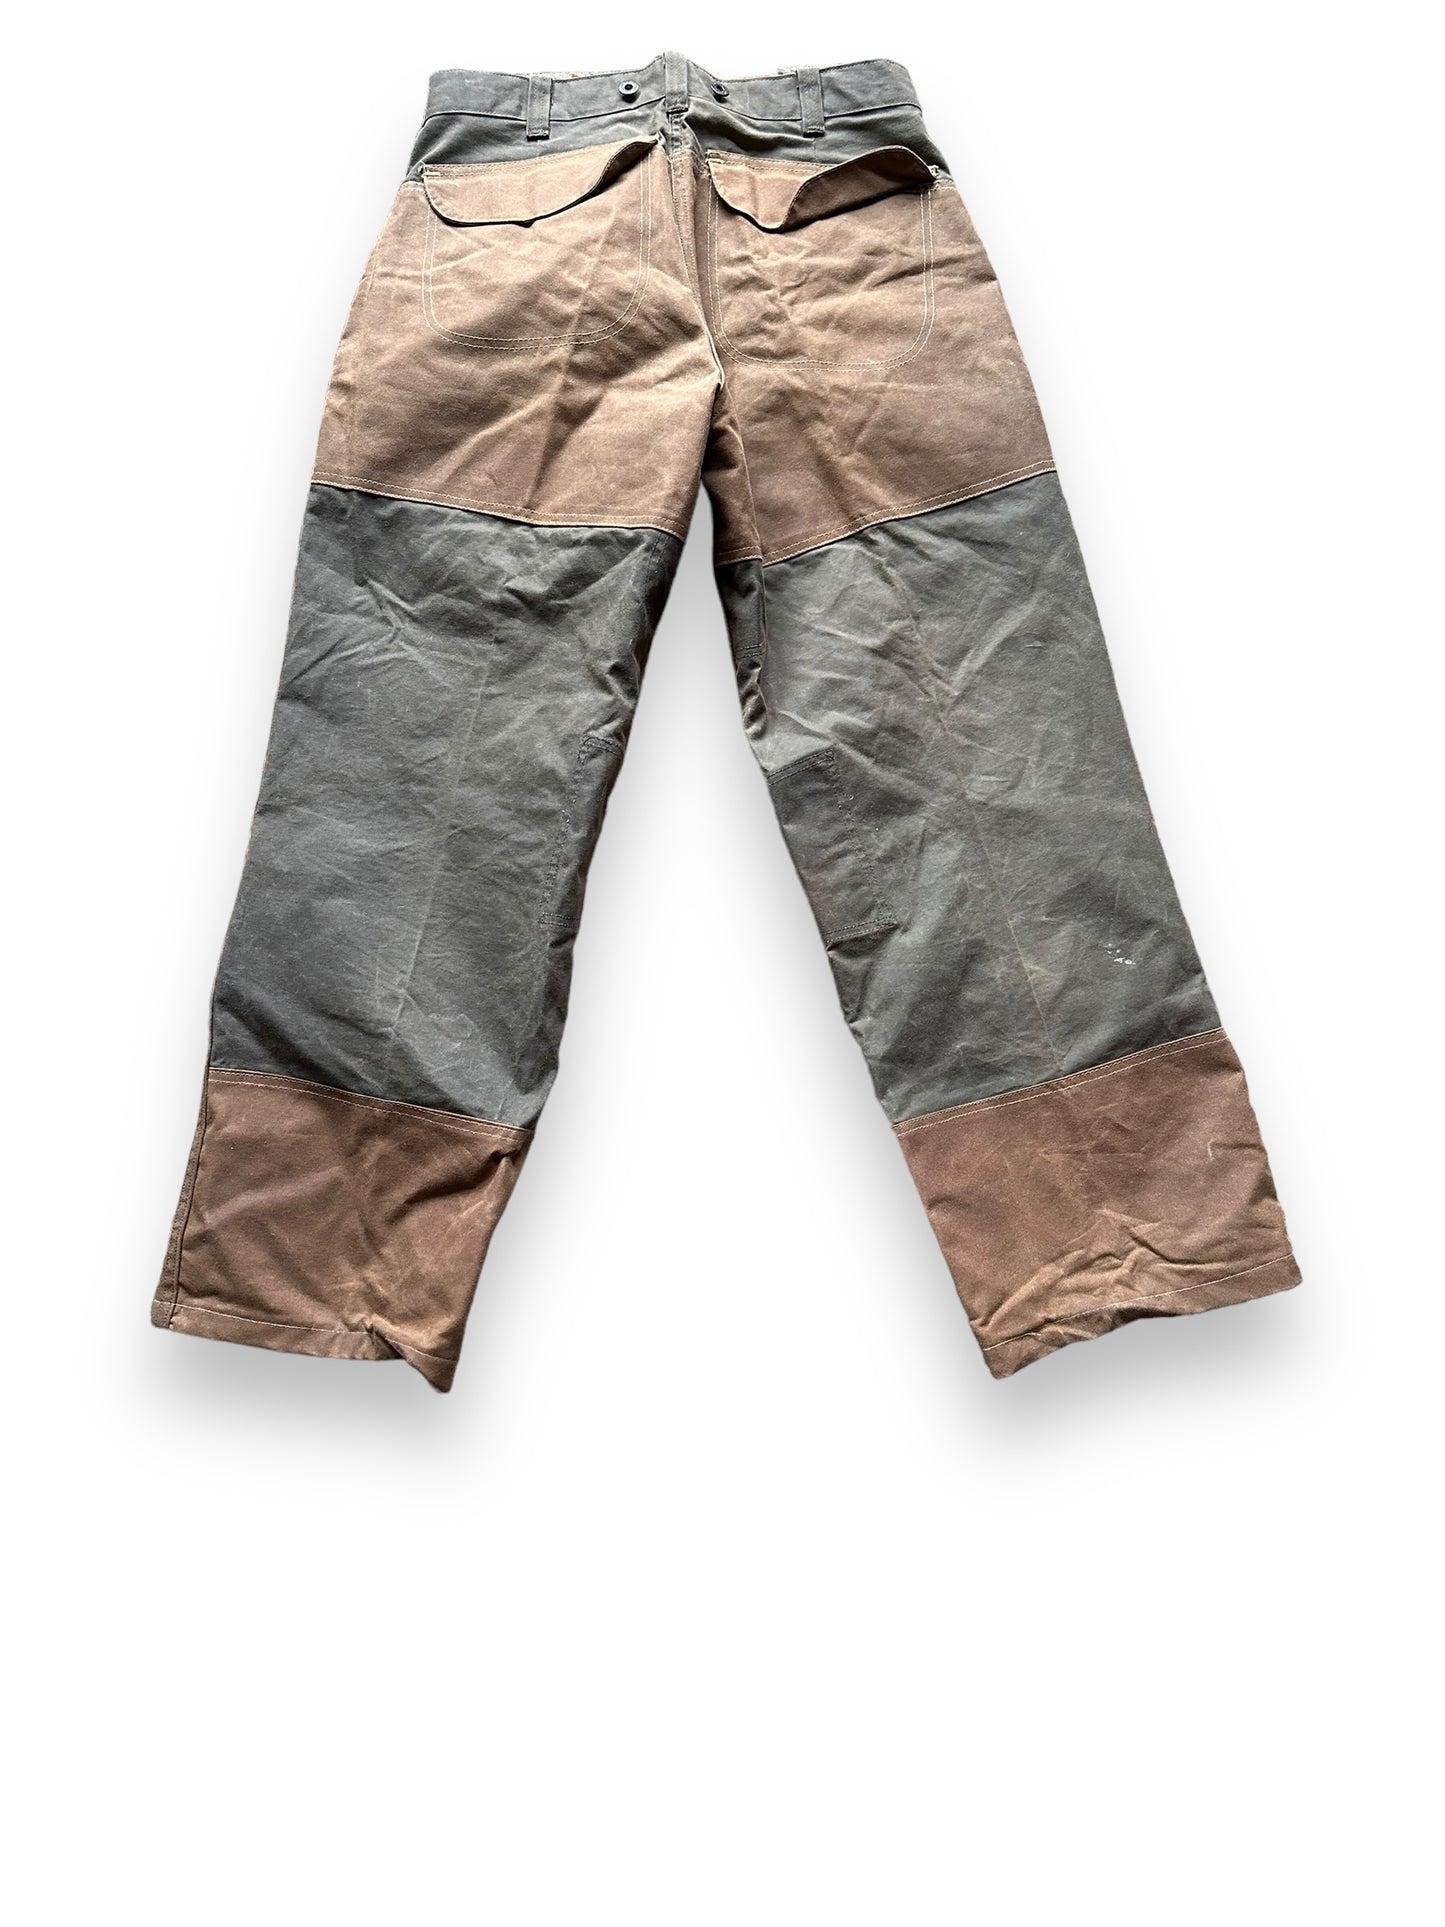 Rear View of Vintage Filson Tin Cloth Double Hunting Pants W34 |  Barn Owl Vintage Goods | Filson Bargain Outlet Seattle